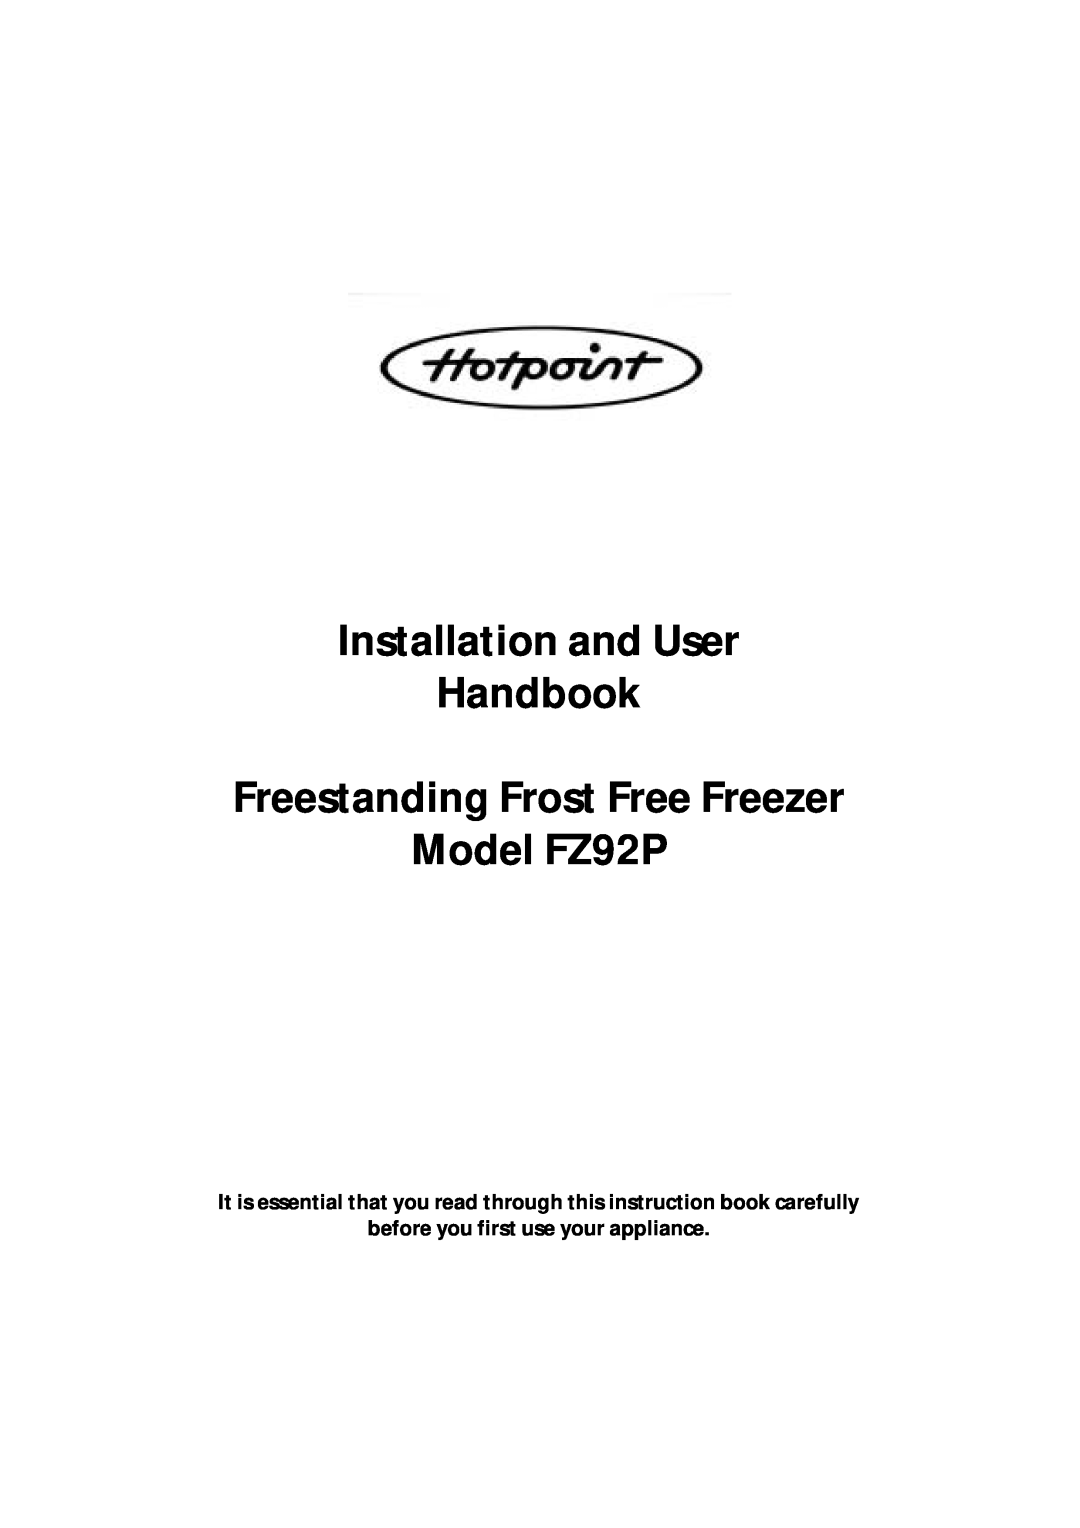 Hotpoint manual It is essential that you read through this instruction book carefully, Model FZ92P 